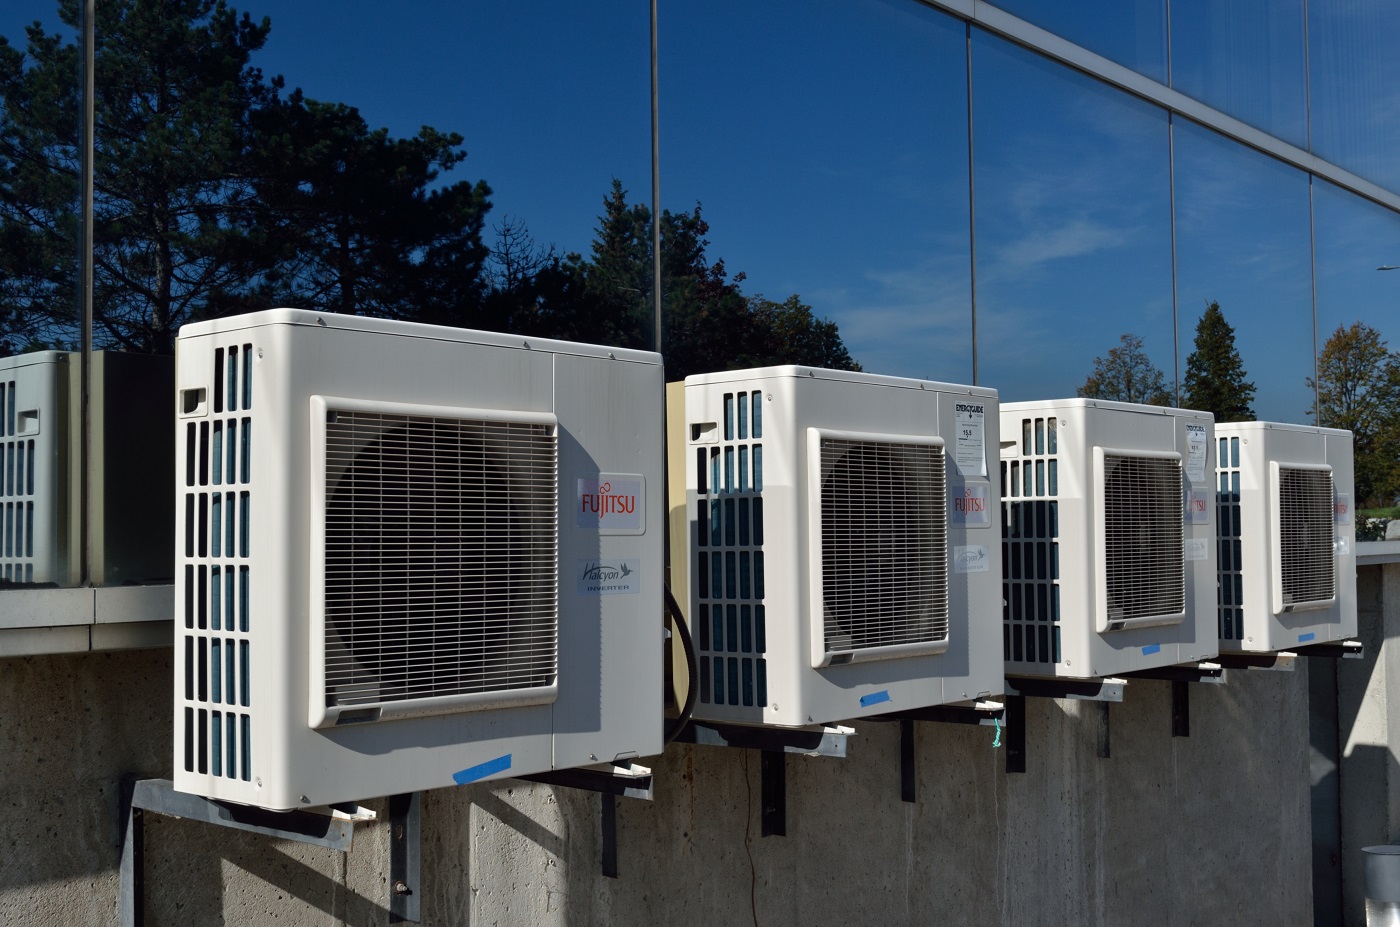 HVAC system on top of building - Home performance testing